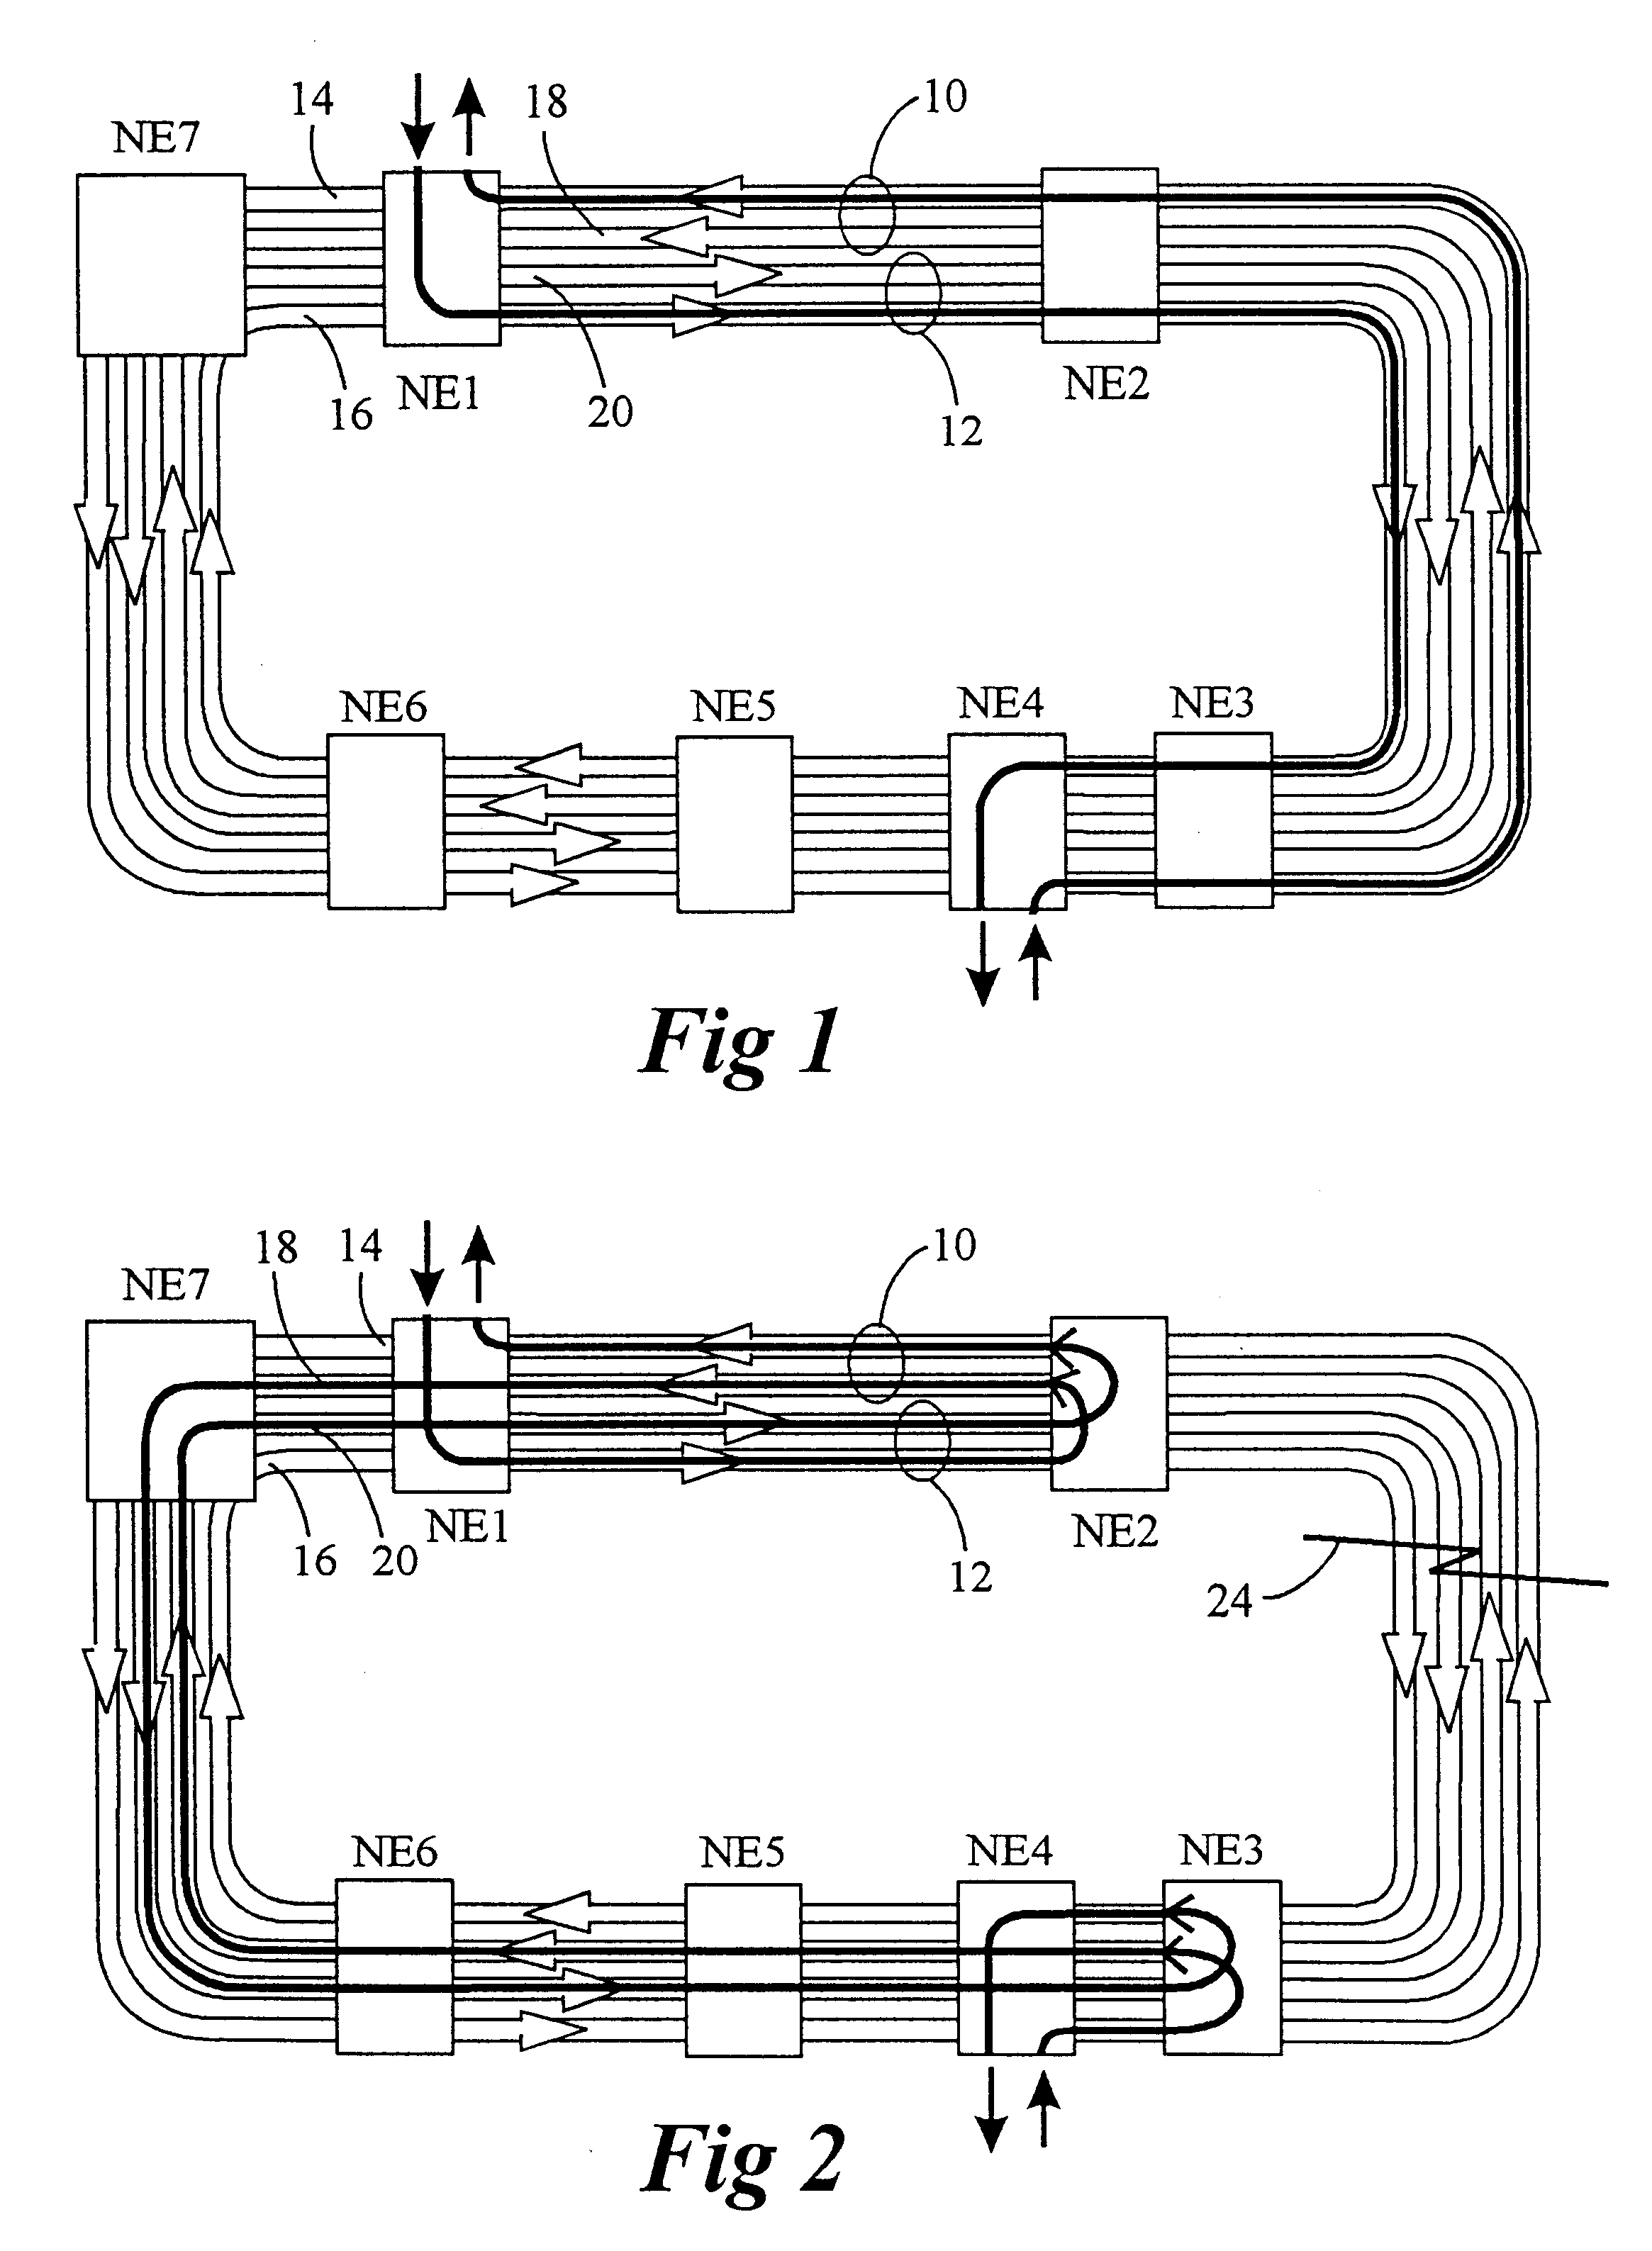 Optical inter-ring protection having matched nodes